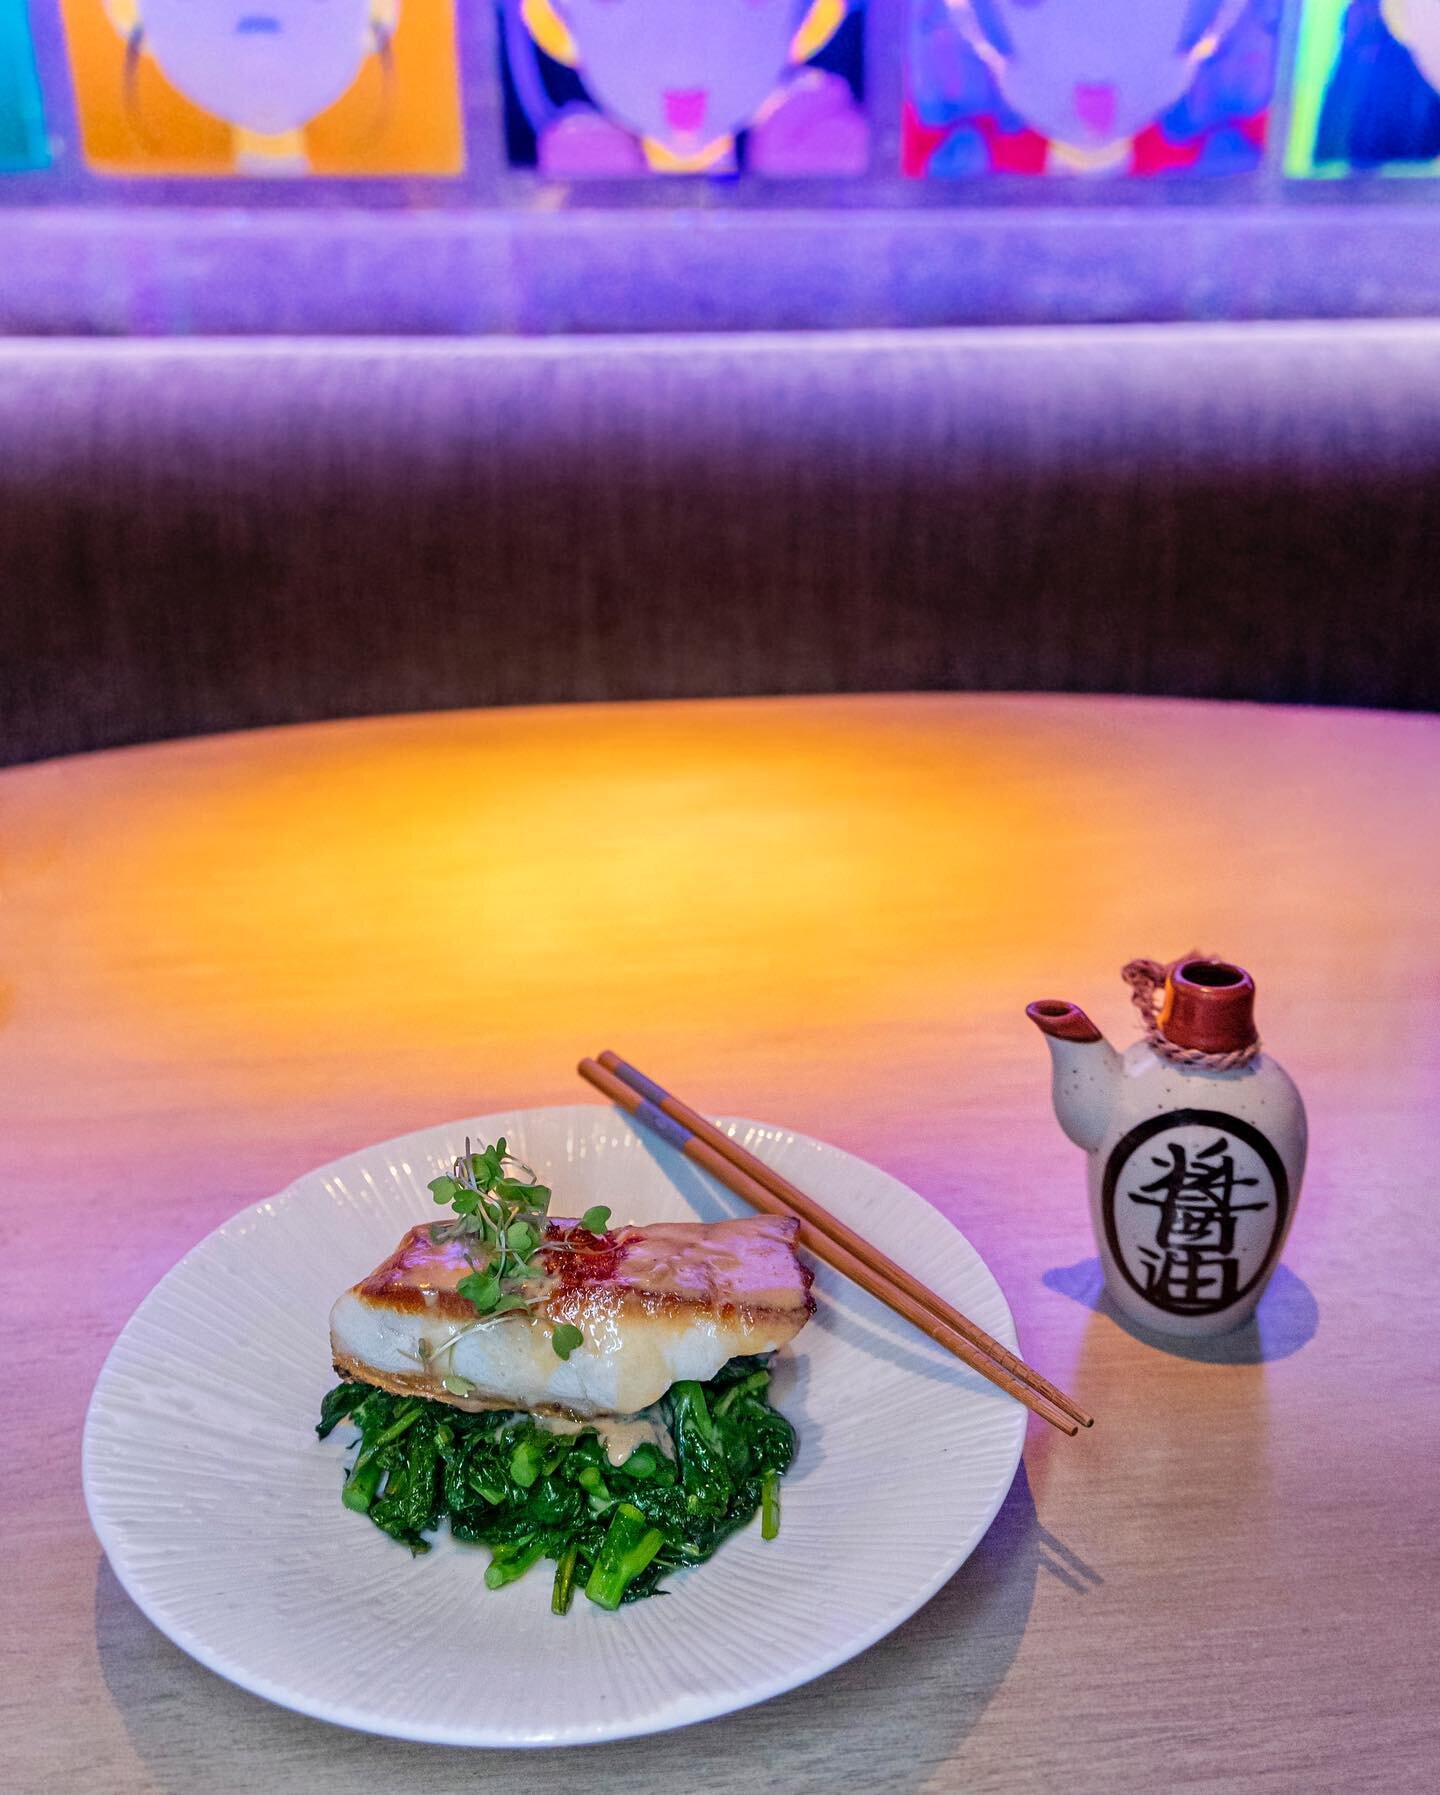 New dish alert 🚨 - You&rsquo;re going to love our Sea bass entree from our fall prix fixe menu! Served with broccoli rabe, yuzu cream, and chili garlic.
&bull;⁠
&bull;⁠
&bull;⁠
#MrsFishLA #SushiArtWhisky #DTLA #LosAngeles #DiscoverLA #DineLA #LAEats